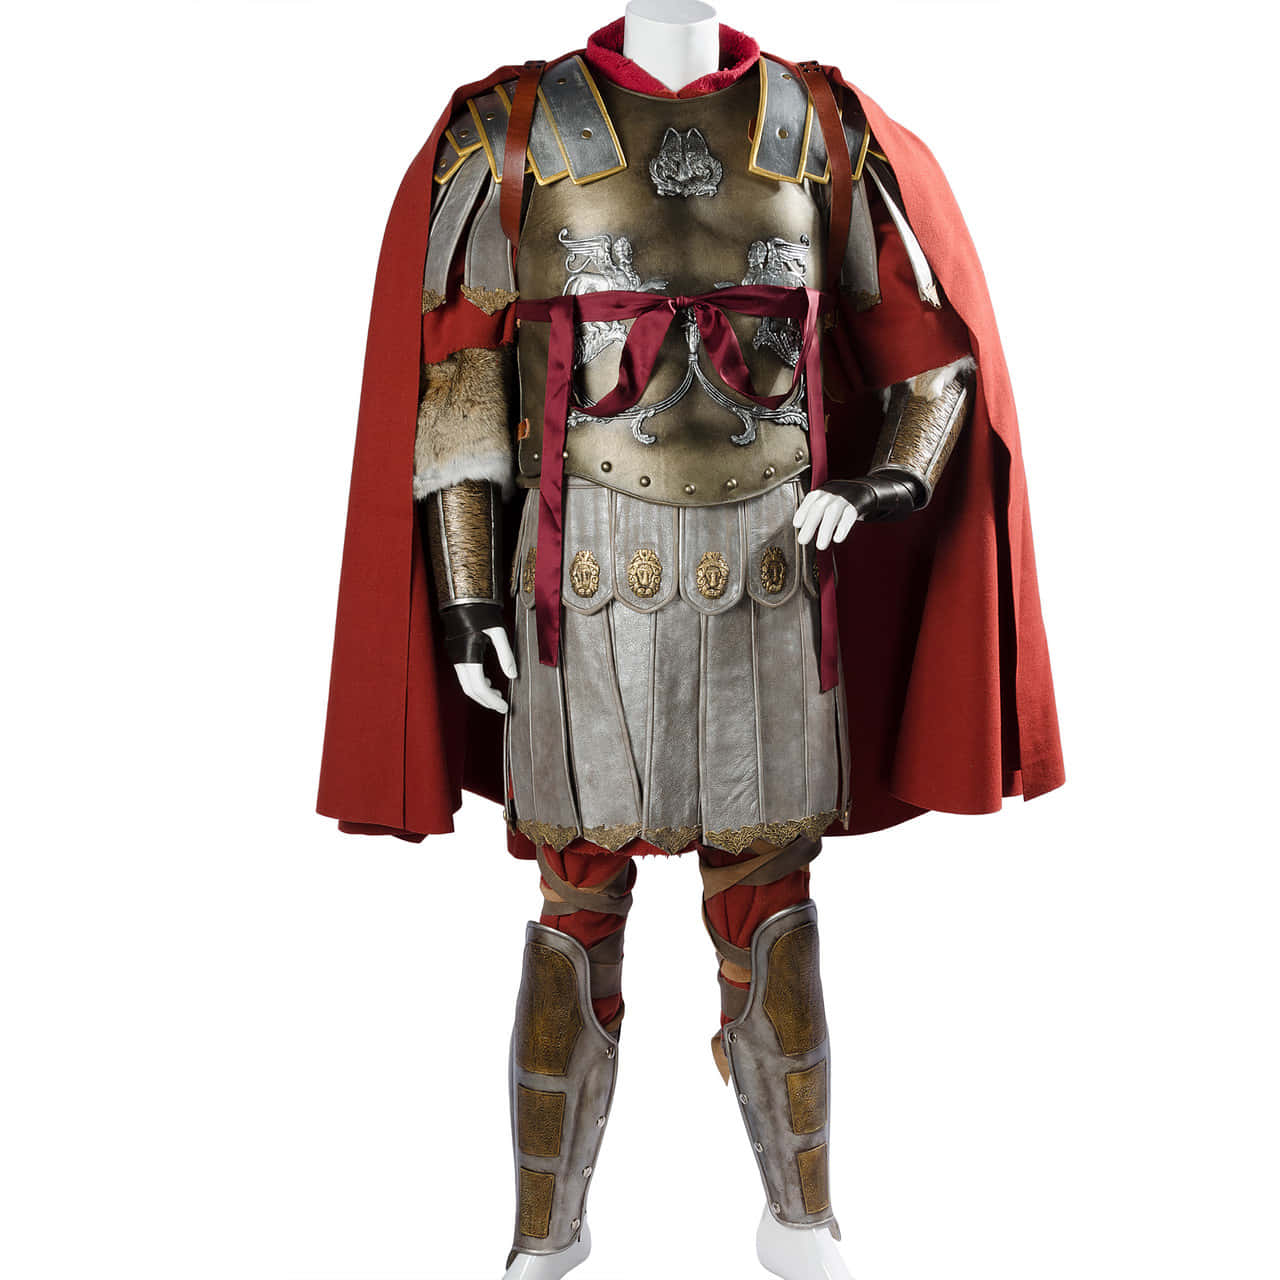 A Roman Soldier Costume With A Cape And Cape